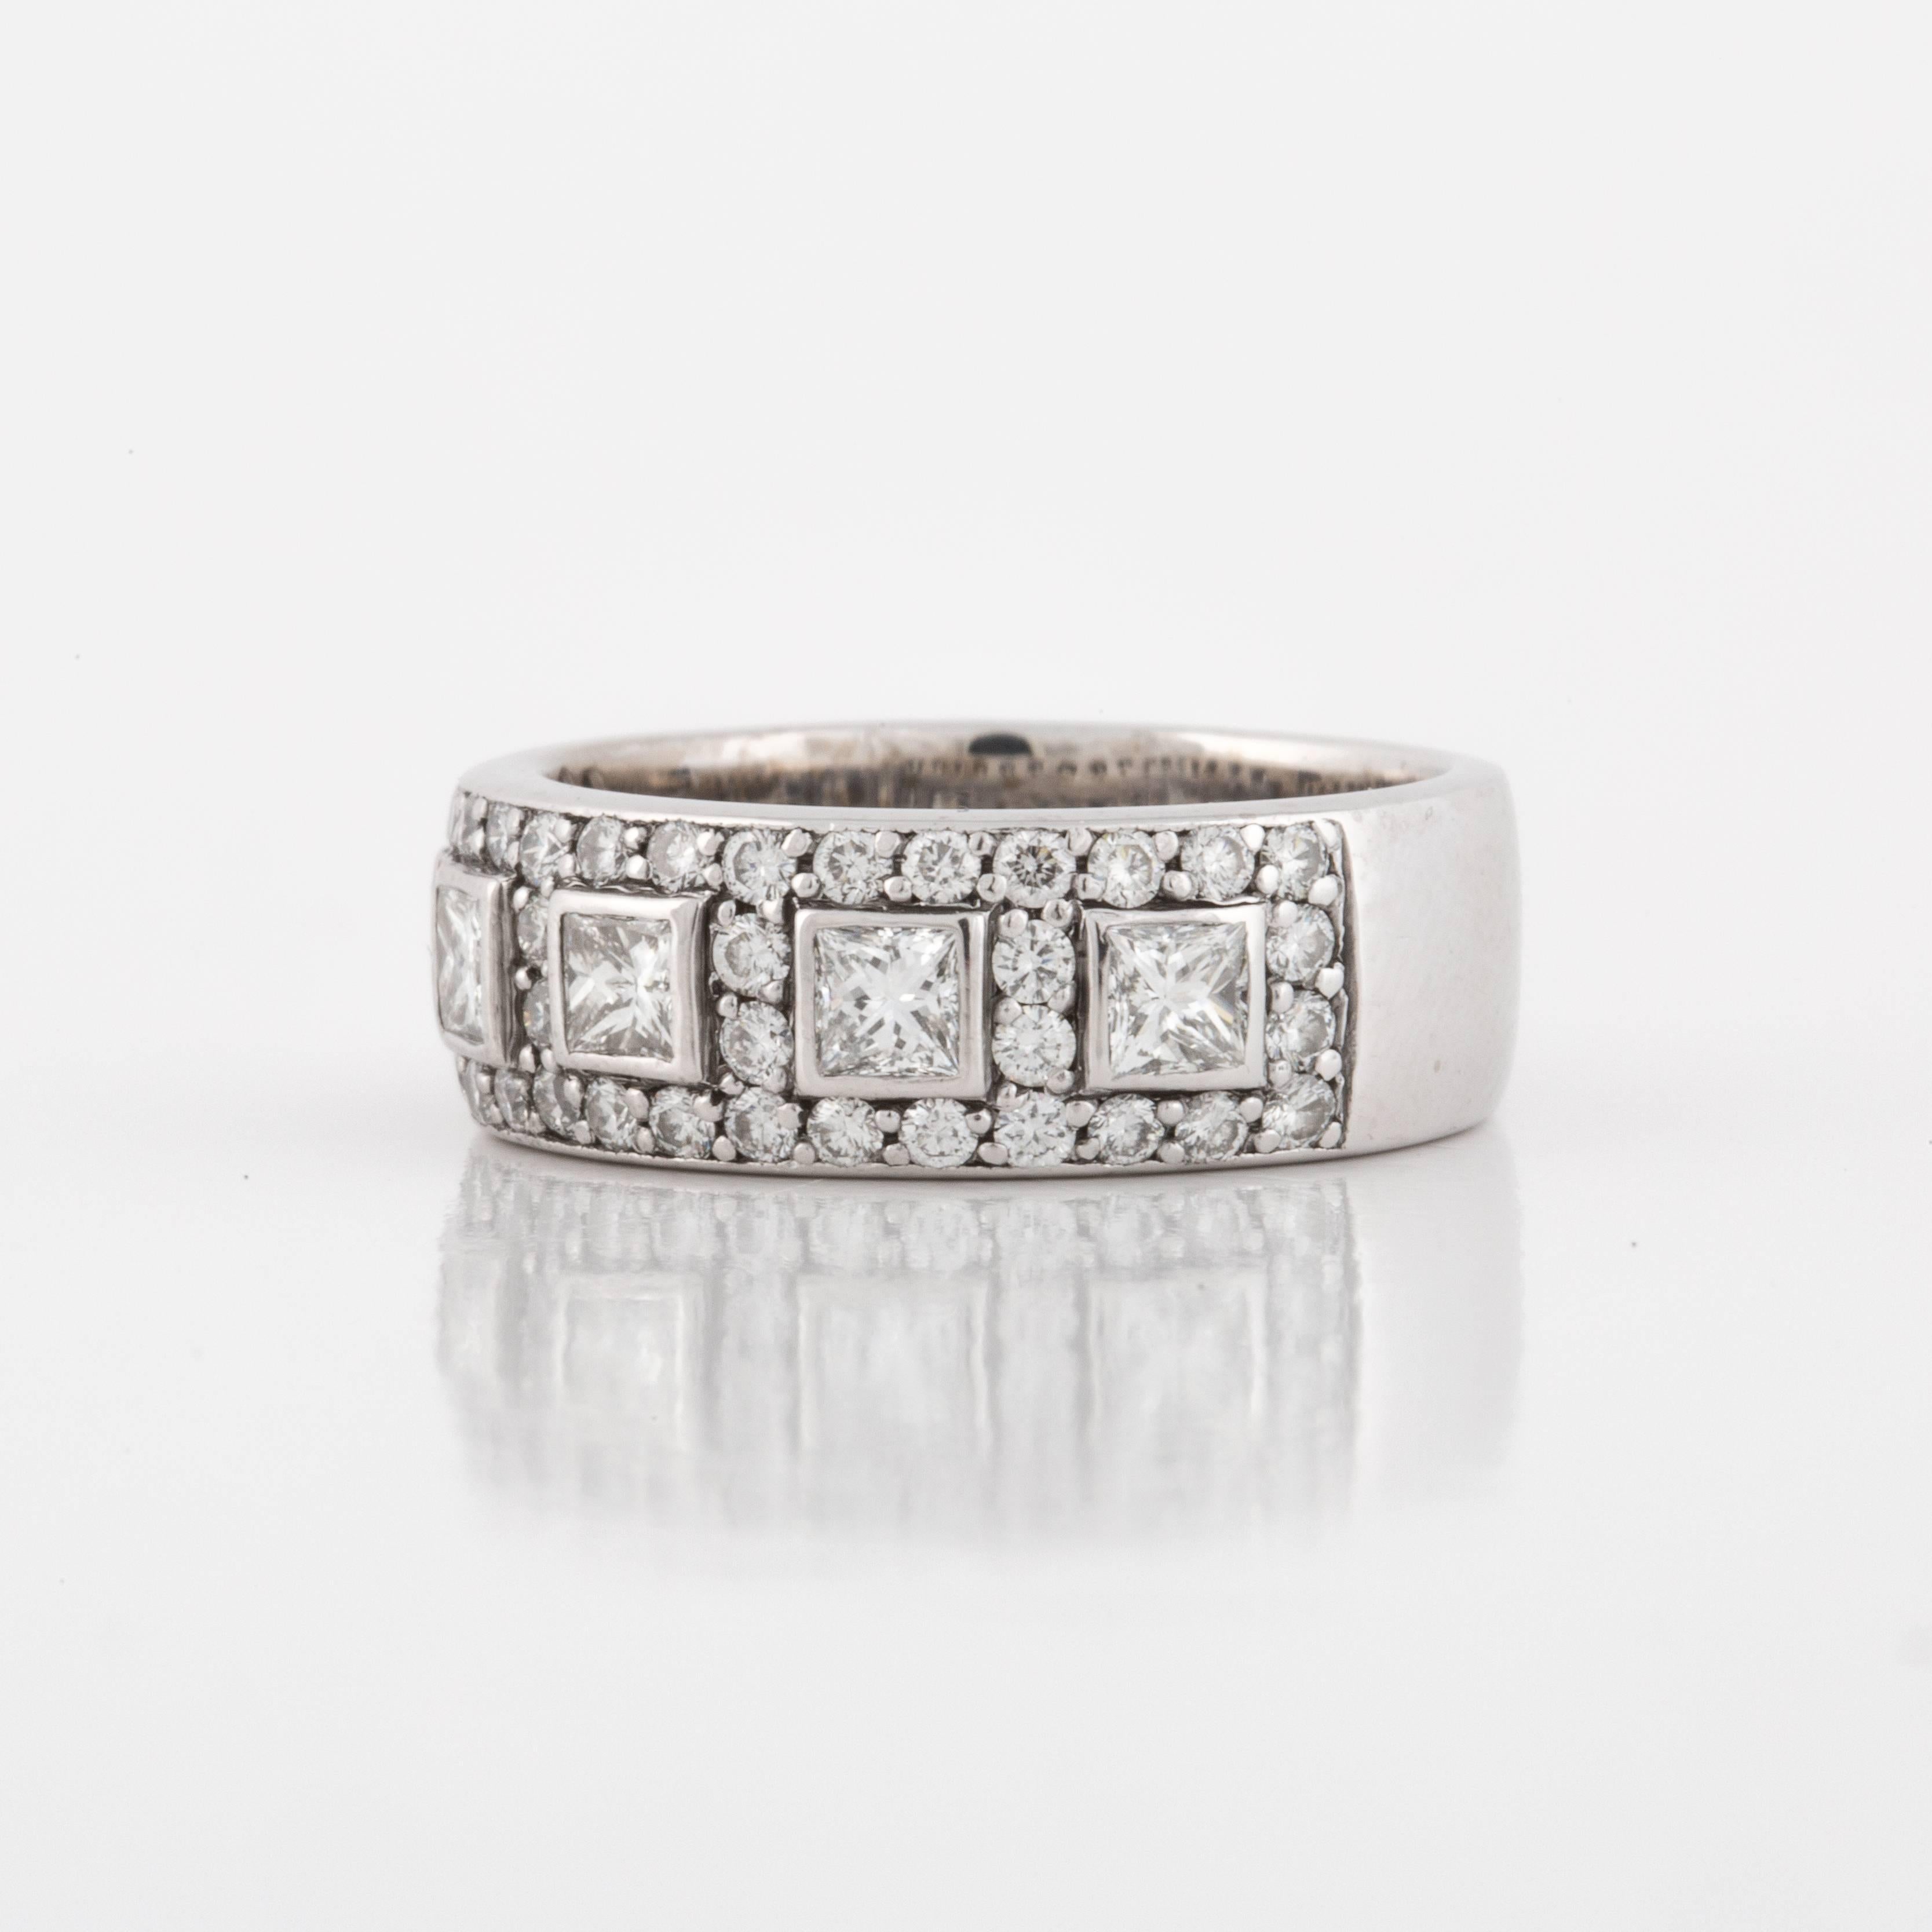 White gold band composed of 18K white gold.  The top is set with five (5) princess cut diamonds, bezel set, that total .65 carats.  Additionally there are forty-four (44) round diamonds which total 0.90 carats.  The total carat weight of the ring is